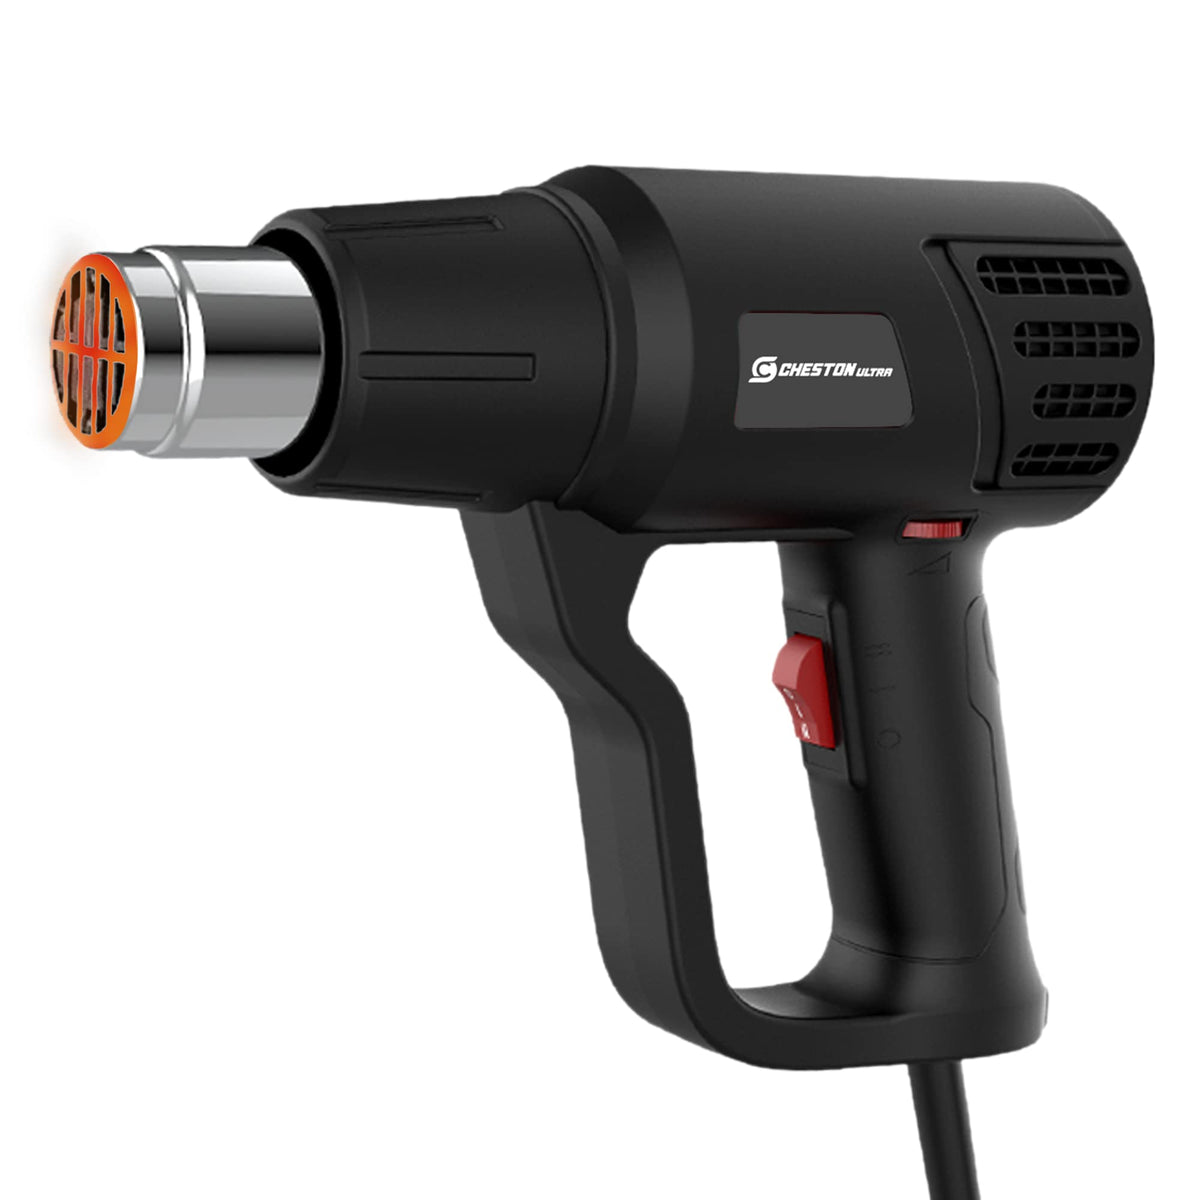 Cheston Ultra 2000W Heat Gun | Dual Air Flow Control Ranging from 300-500L/min & Variable Temp from 350°C-550°C I Hot Air Gun with for Crafts, Shrink Wrapping, Stripping Paint